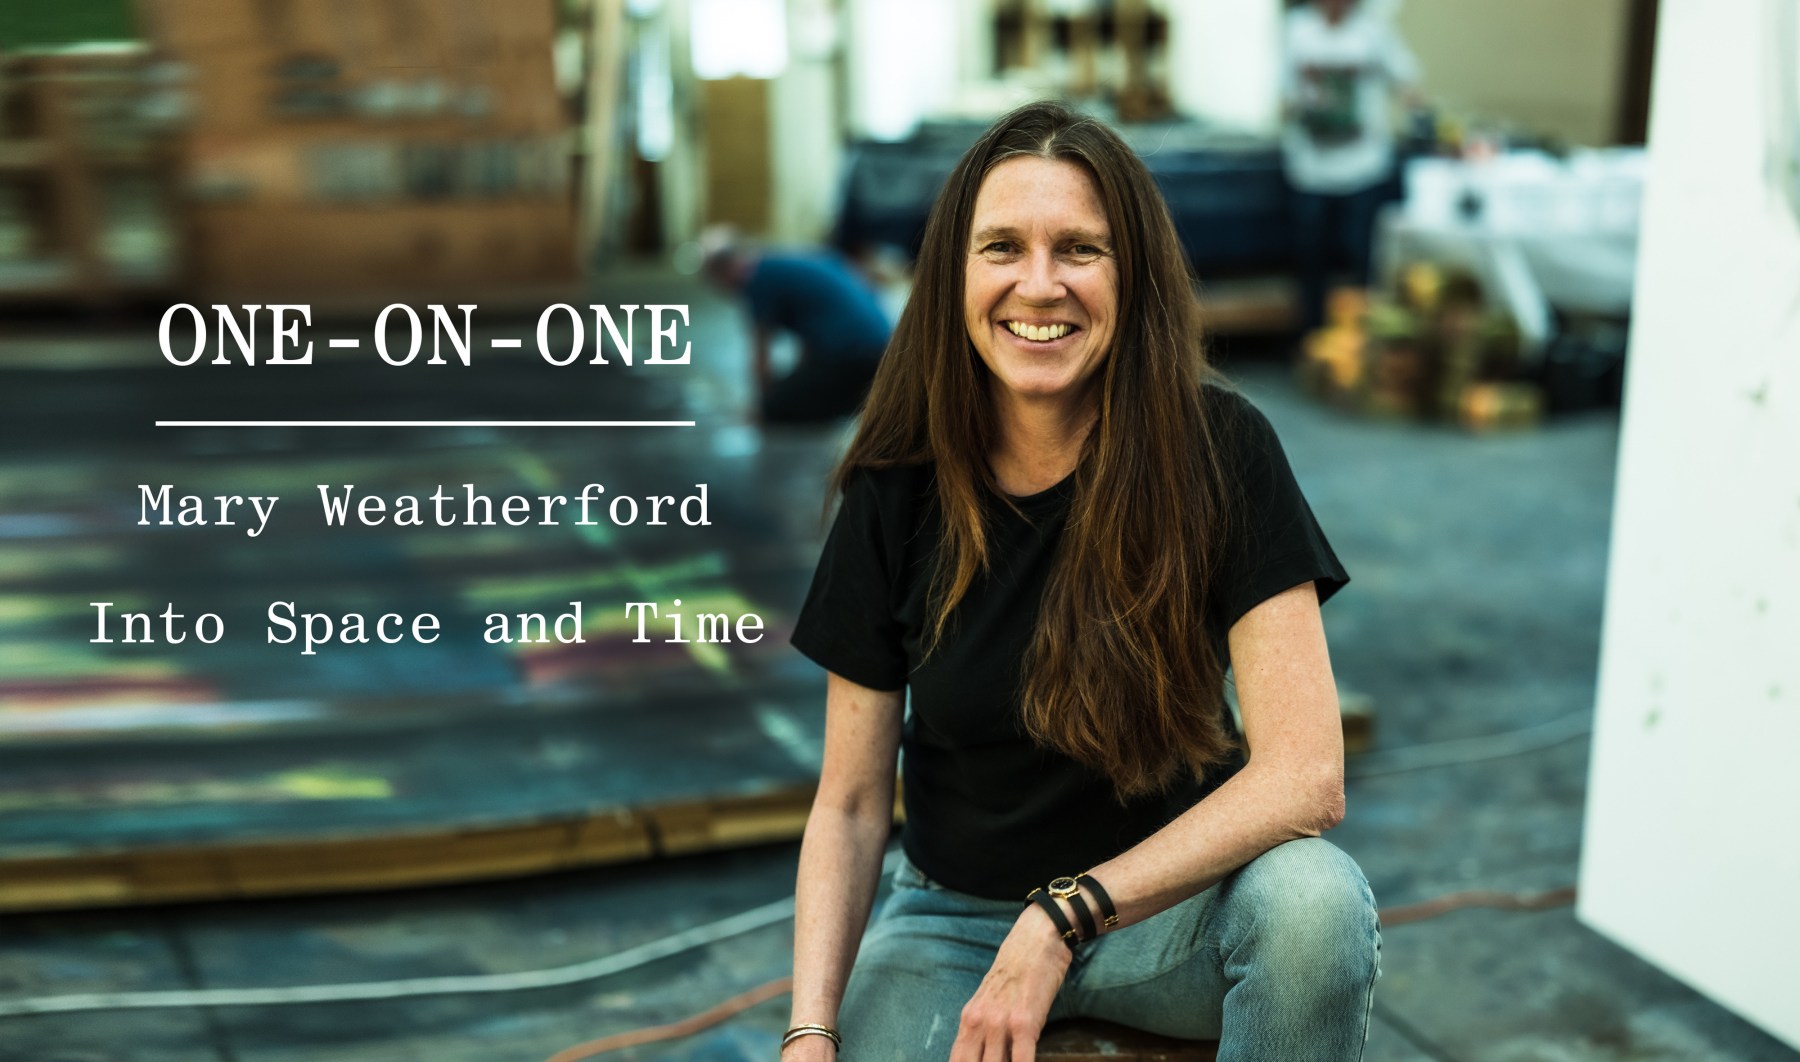 One-on-One: Mary Weatherford - Into Space and Time - Viewing Room - David Kordansky Gallery